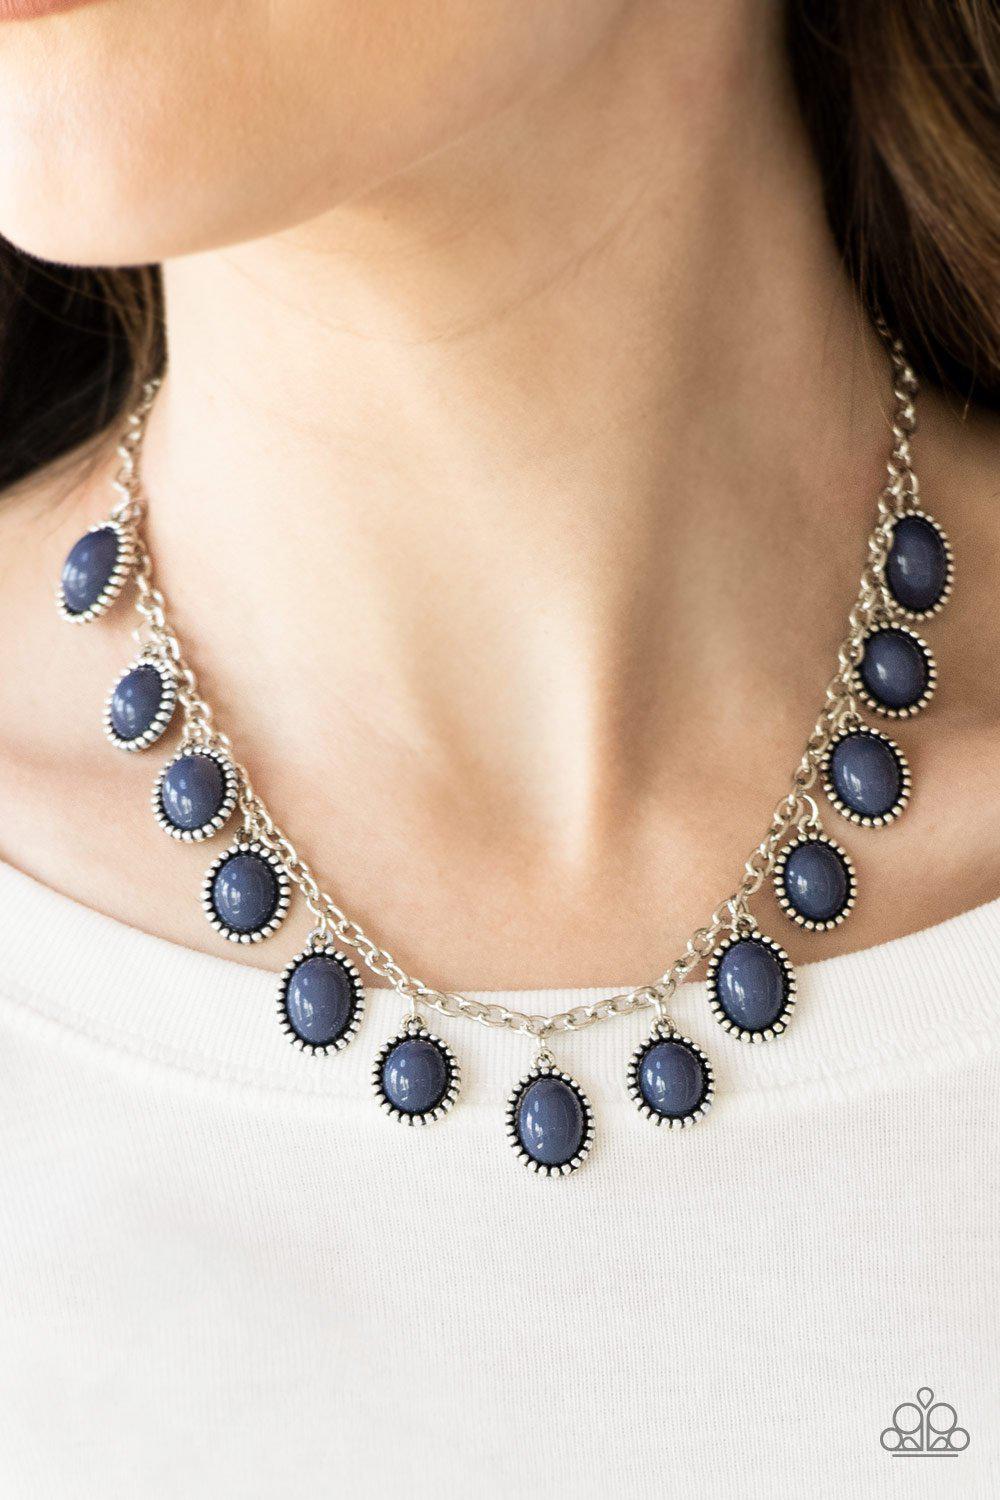 Make Some ROAM! Blue Necklace - Paparazzi Accessories- lightbox - CarasShop.com - $5 Jewelry by Cara Jewels